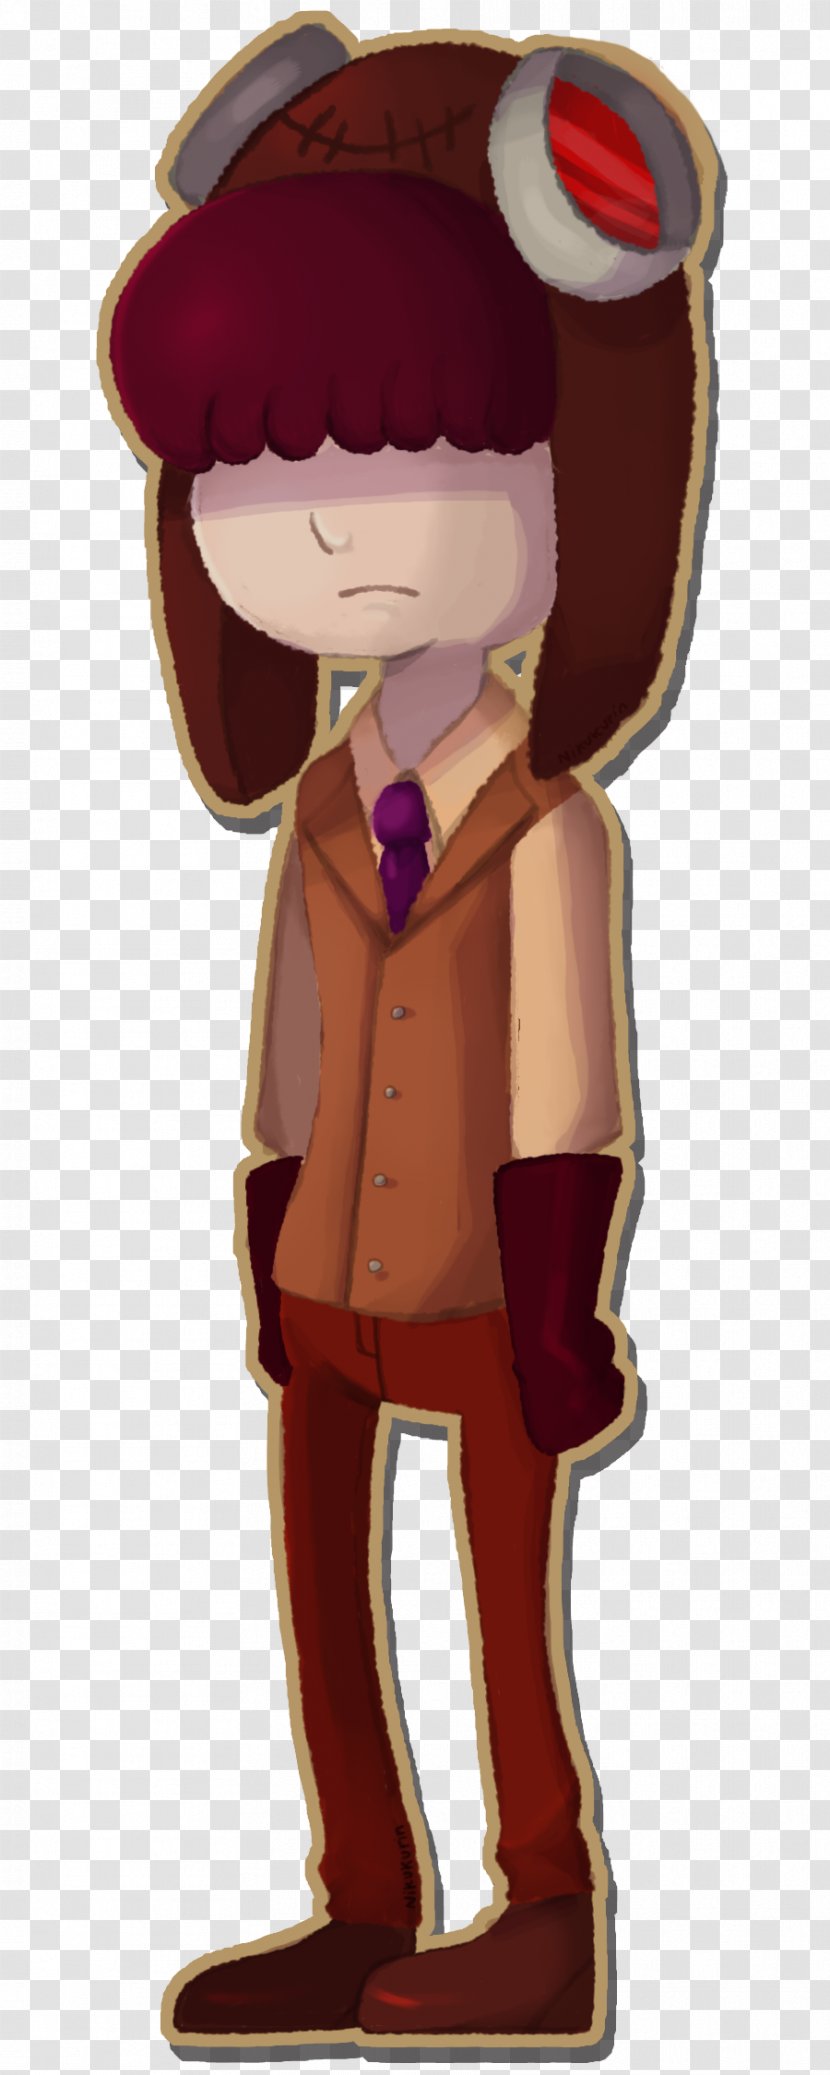 Cartoon Maroon Figurine Character - Art - Unfairly Prosecuted Persons Day Transparent PNG